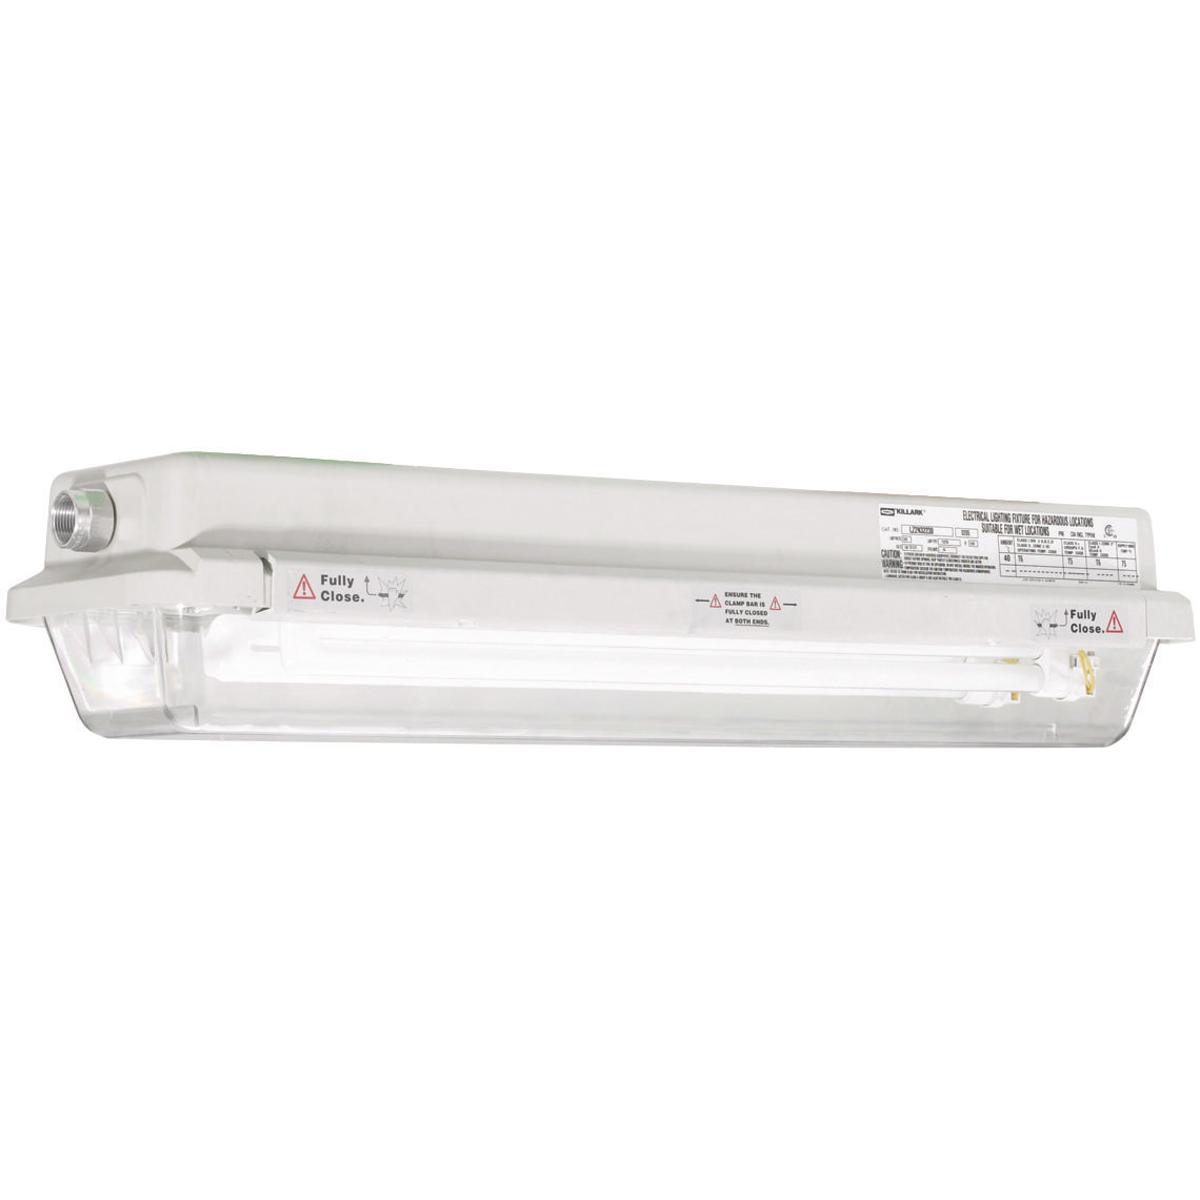 Hubbell LZ2N17230 LZ2N Series- 17W 120-277V - 2' 2-Lamp T8 - Electronic 50/60 Hz 0°F Start Medium Bi-Pin  ; Lexan® Clear Lens, impact resistant polycarbonate ; Housing-one piece fiberglass reinforced polyester, NEMA 4X & IP66 rated. ; Two 3/4” NTP aluminum hubs - one at ea